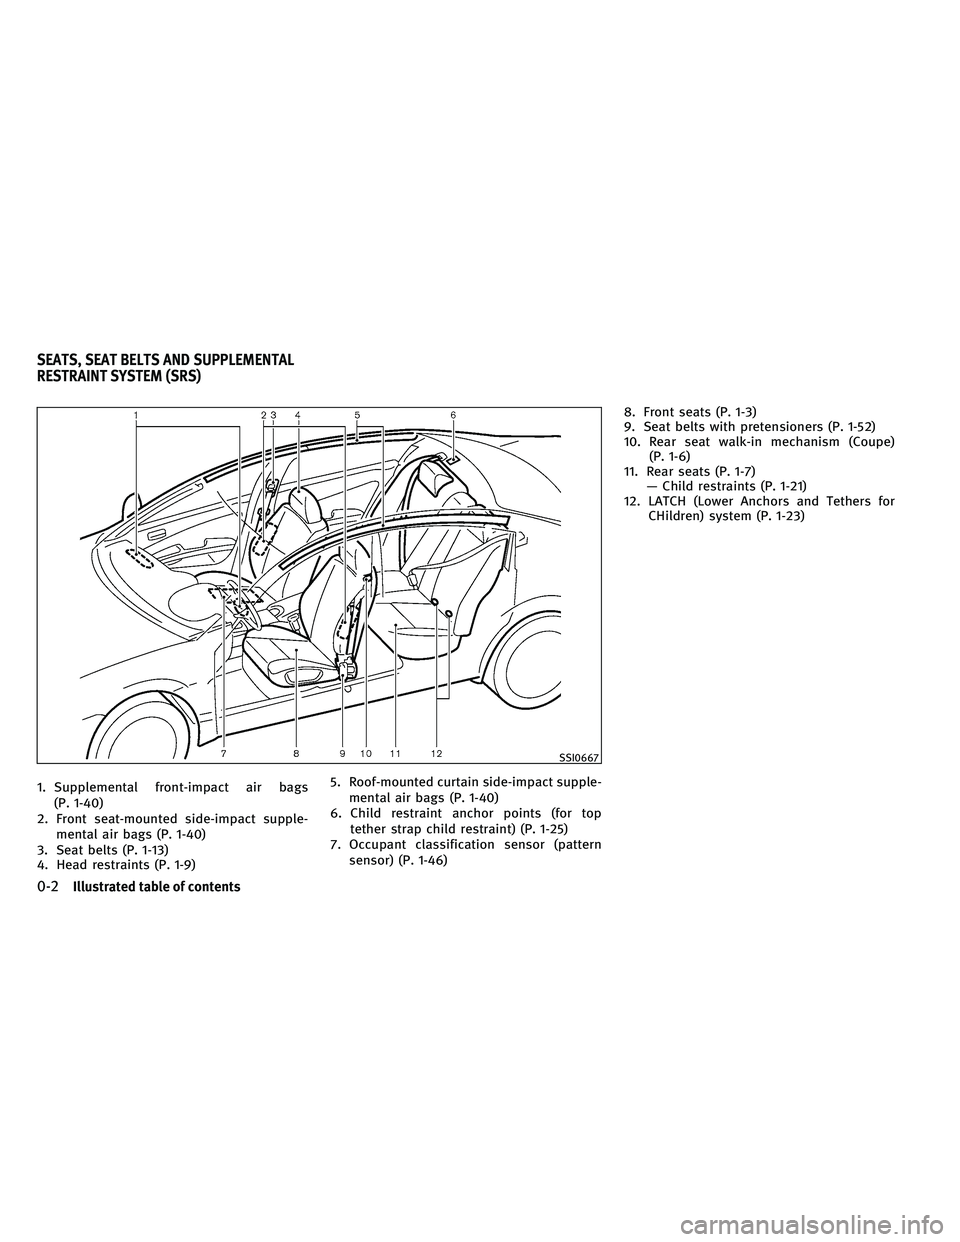 INFINITI G 2011  Owners Manual 1. Supplemental front-impact air bags(P. 1-40)
2. Front seat-mounted side-impact supple- mental air bags (P. 1-40)
3. Seat belts (P. 1-13)
4. Head restraints (P. 1-9) 5. Roof-mounted curtain side-impa